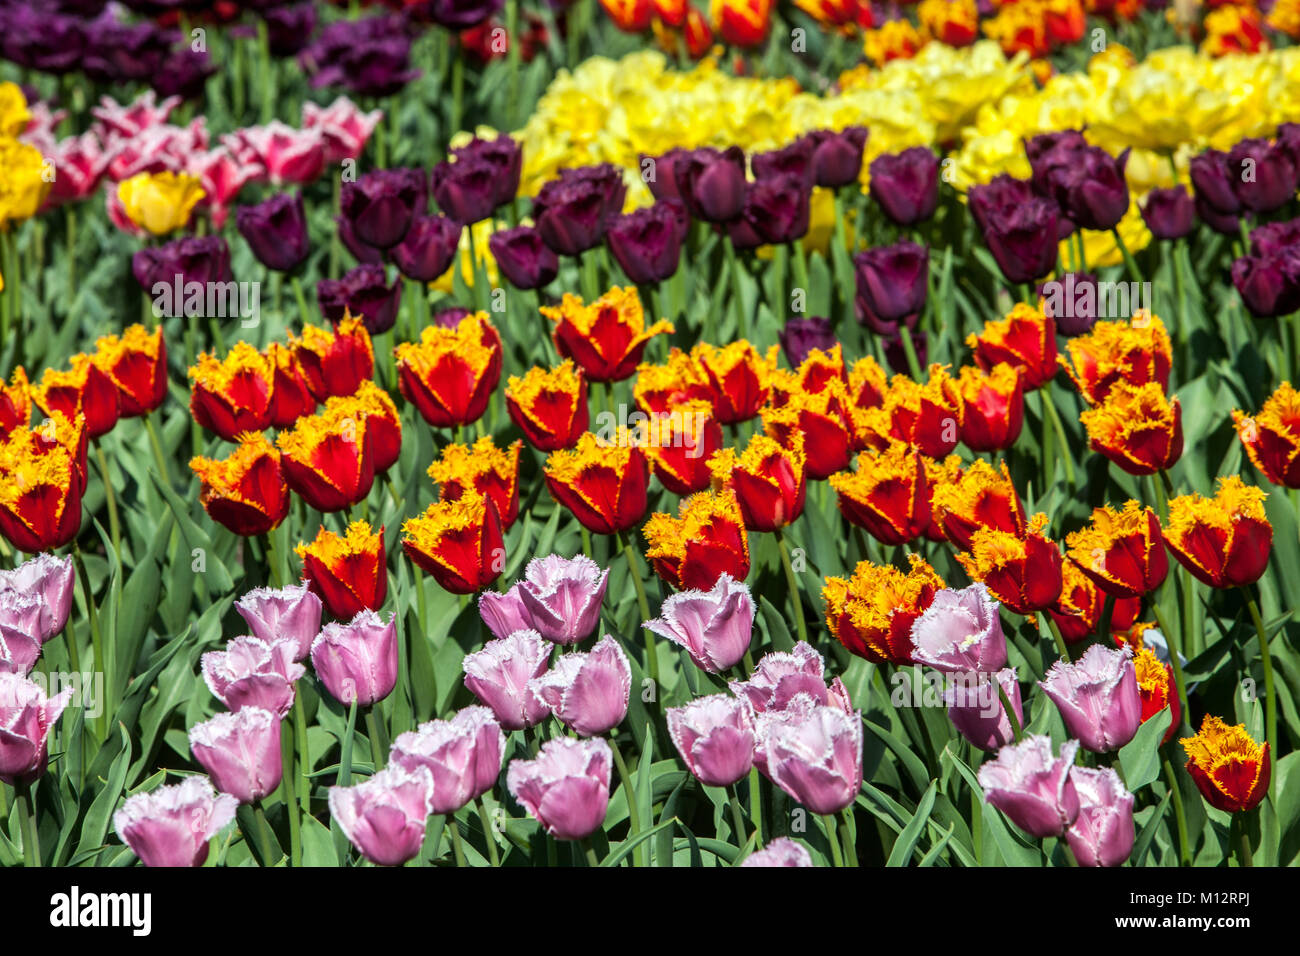 Tulips flower beds full of colorful tulips garden flowers red pink orange Stock Photo